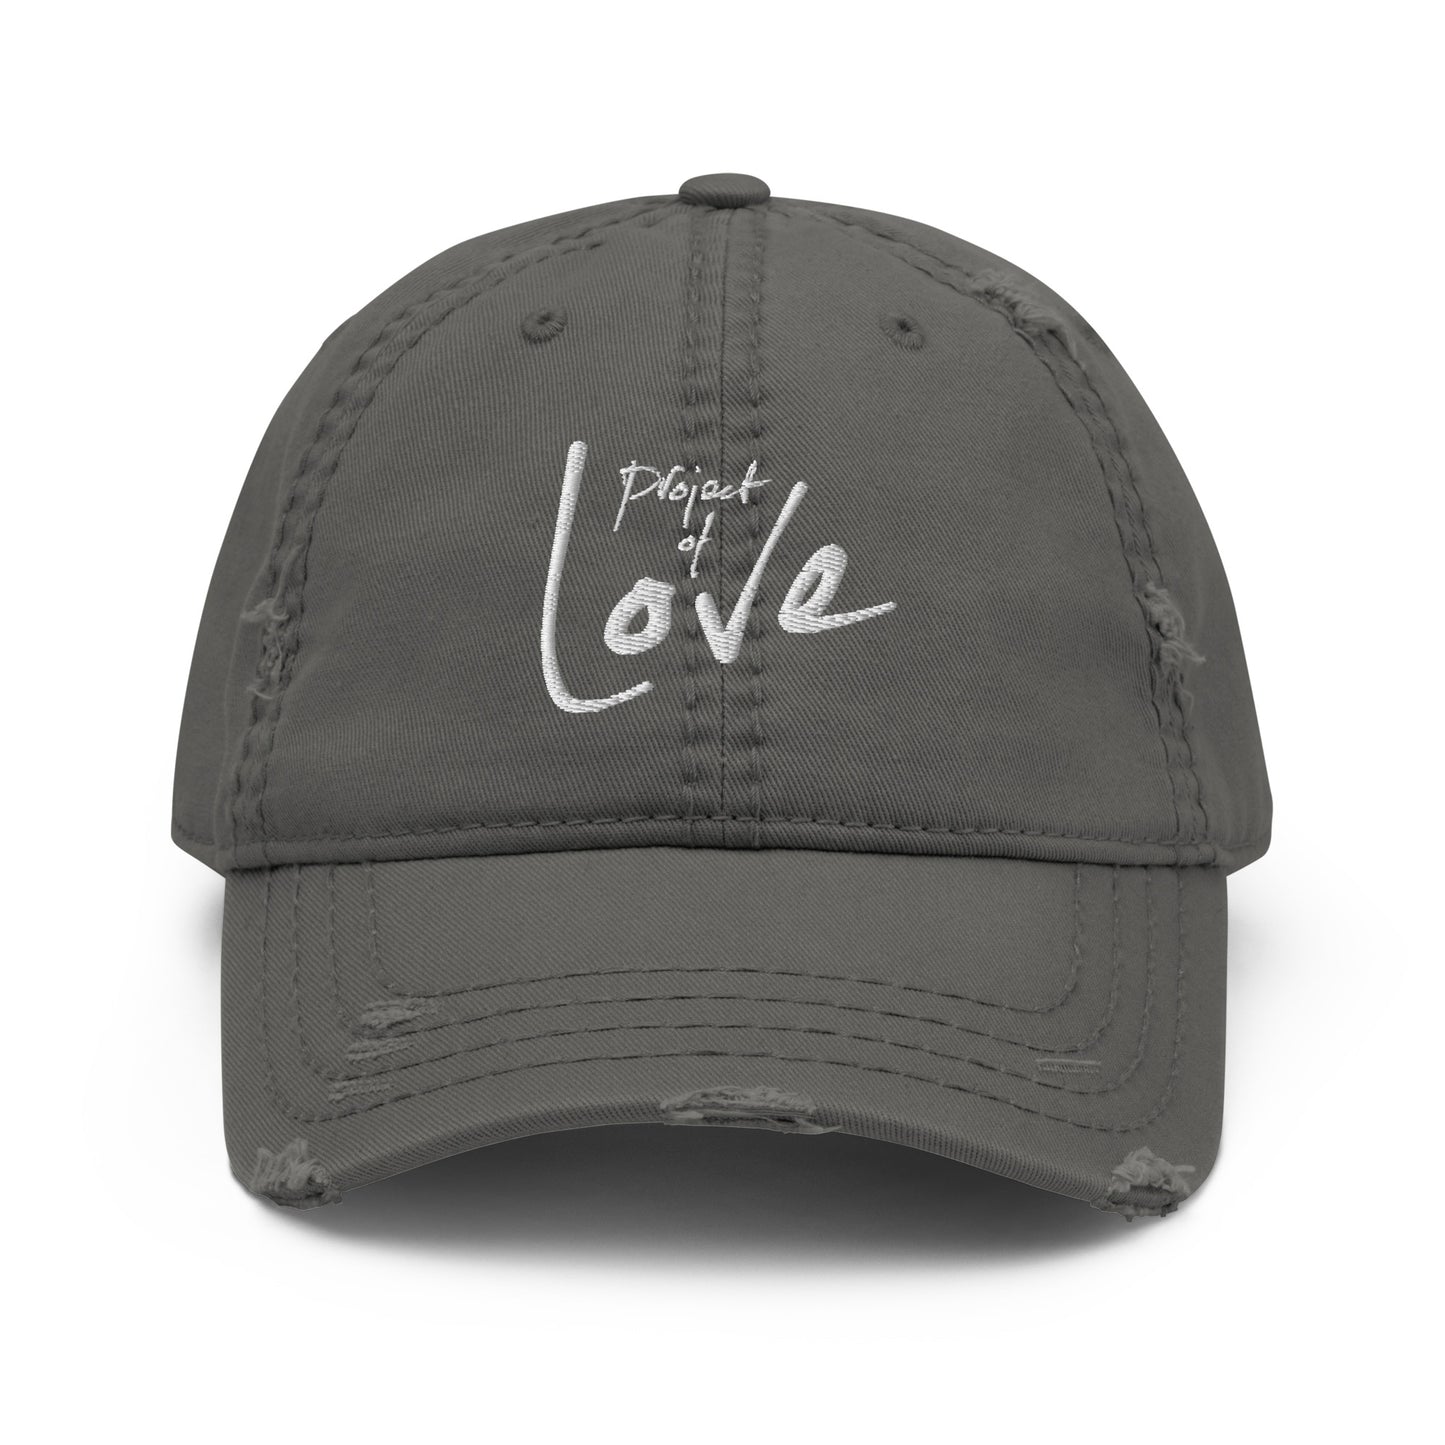 Distressed 'Project of Love' cap